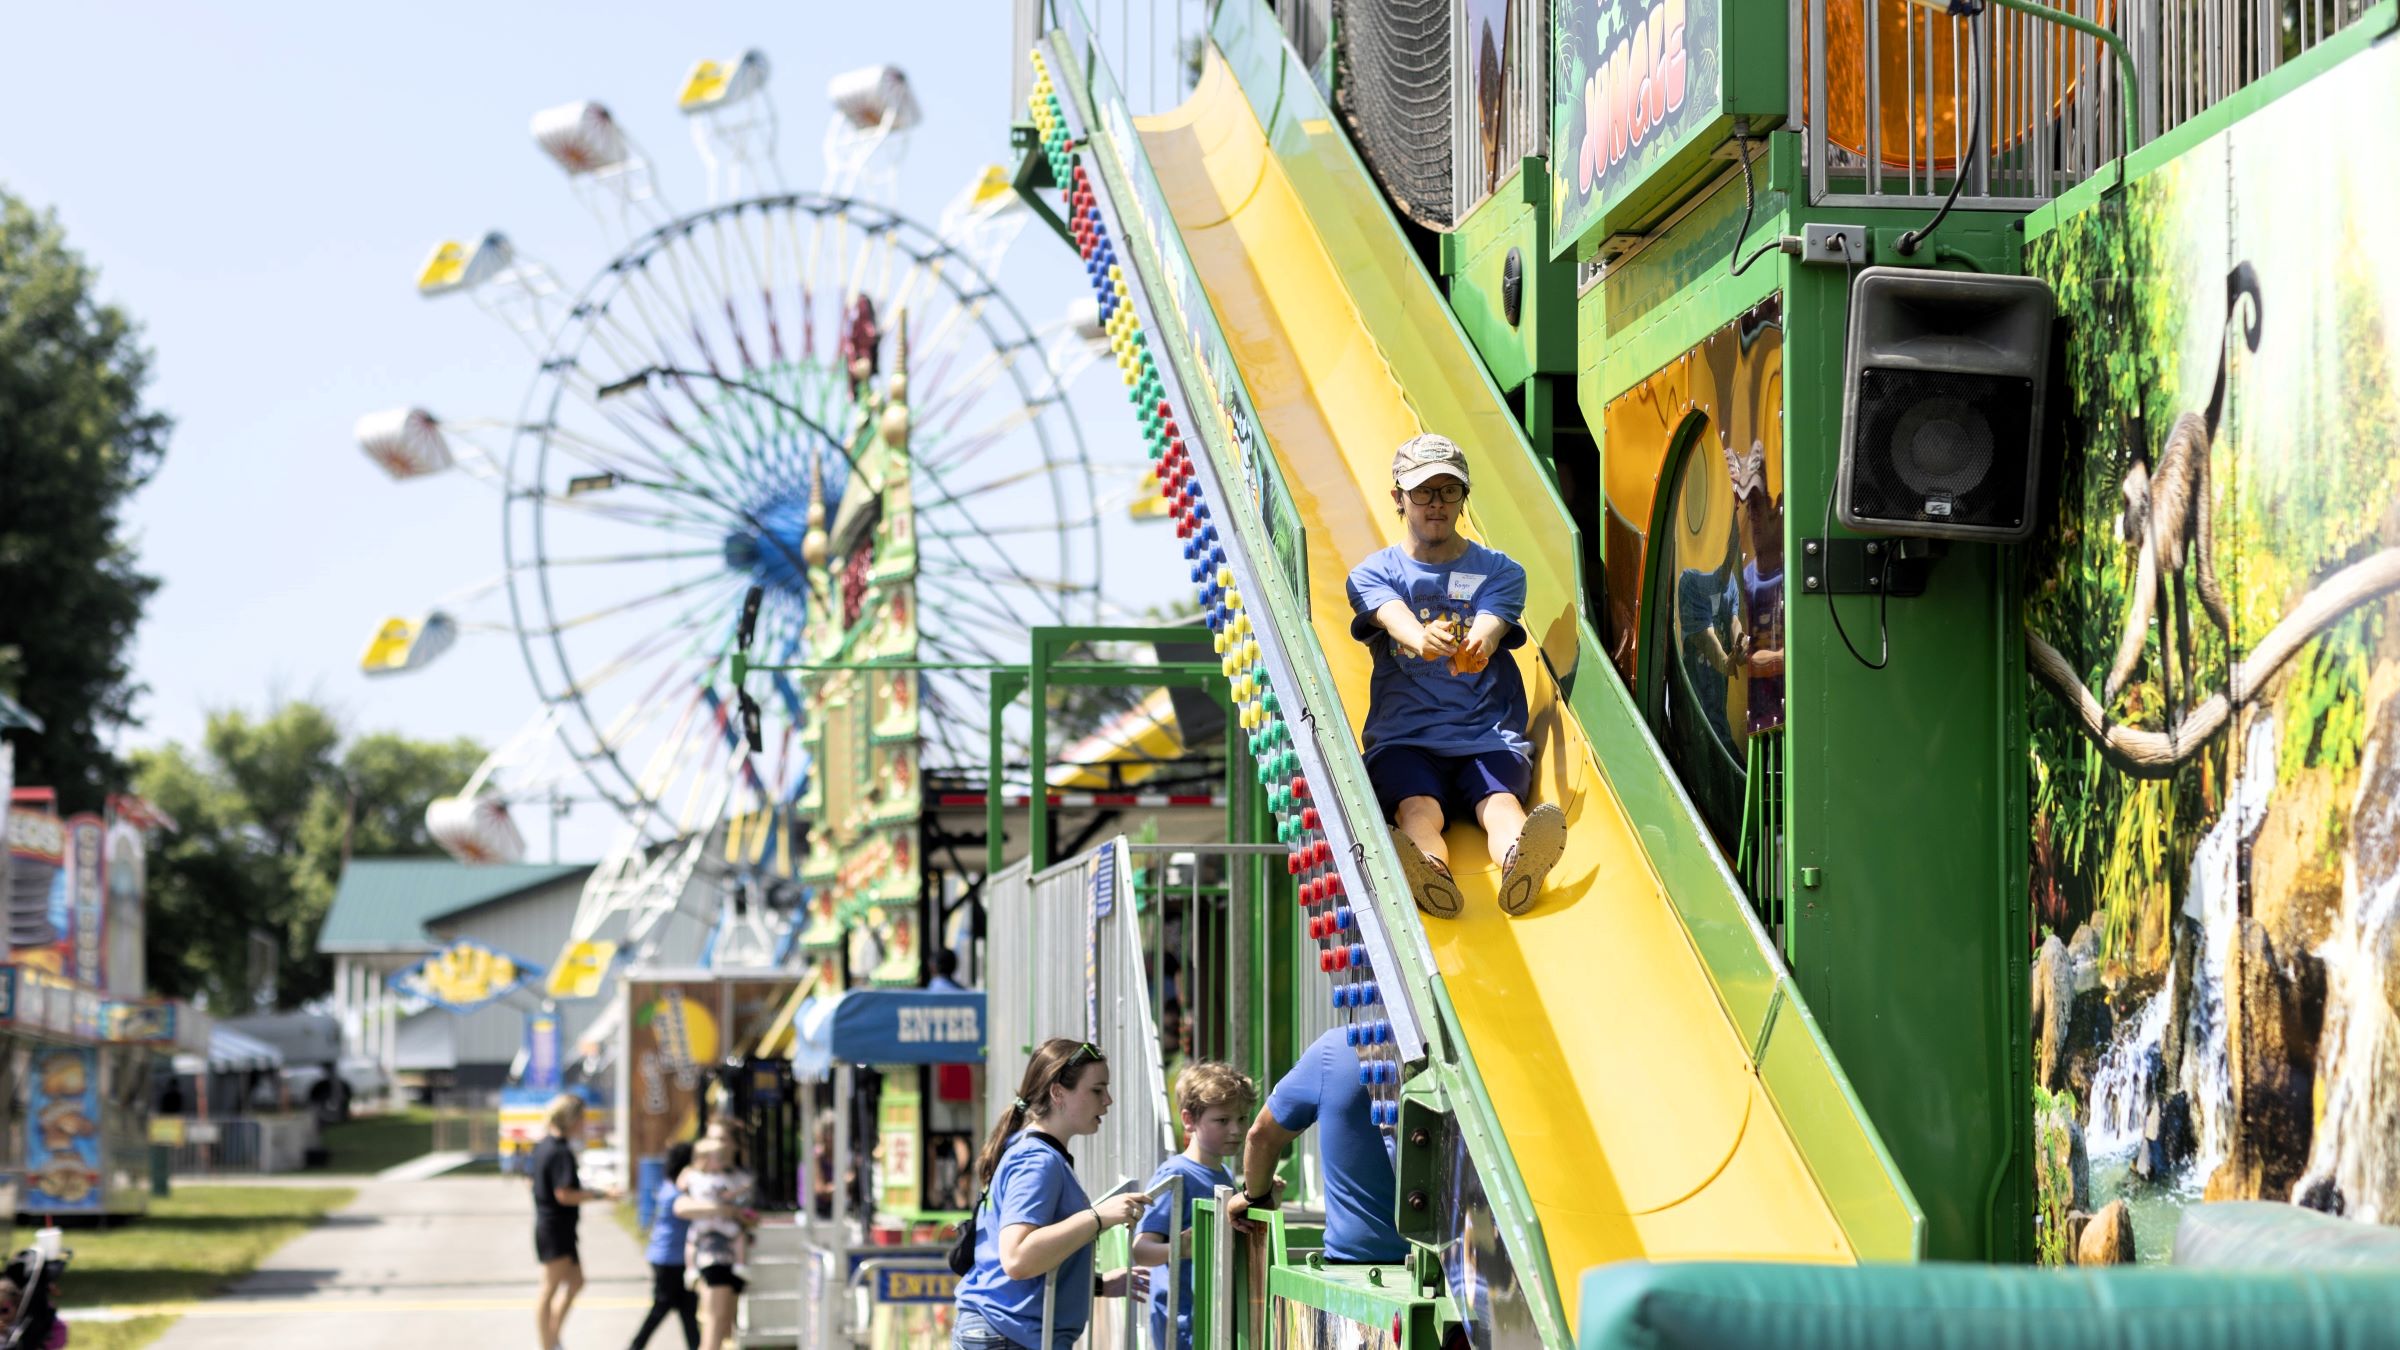 The Boone County Fairgrounds provided a fun, carnival atmosphere during Sunshine Day. Photo by Sabrina Hounshell.